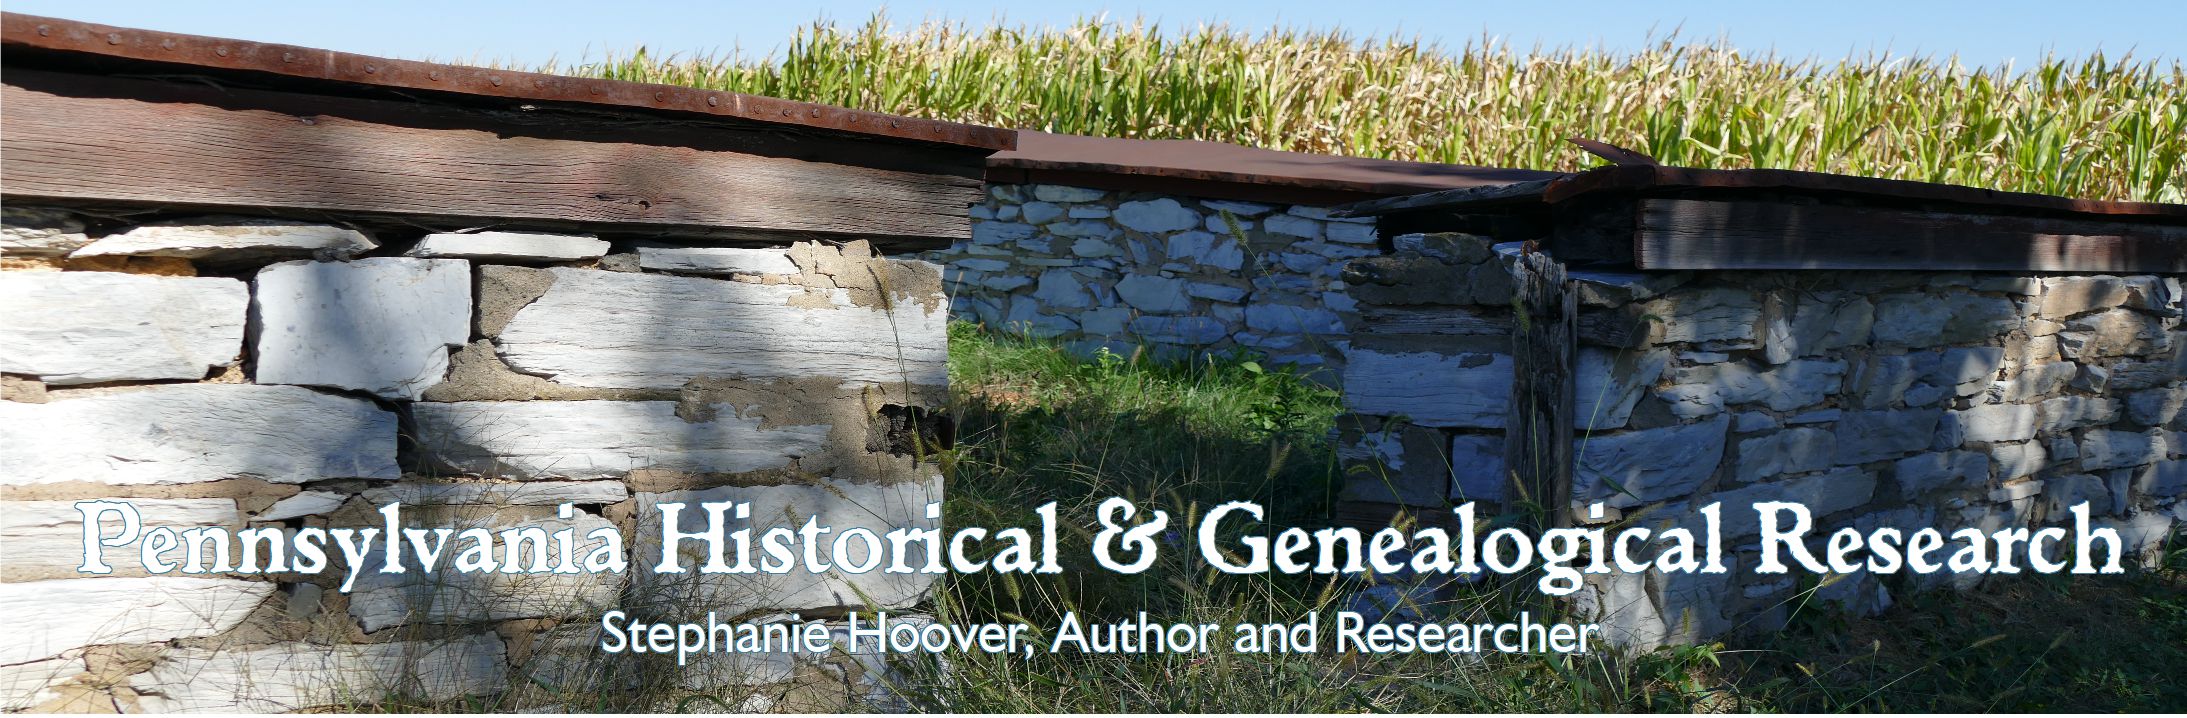 Pennsylvania Genealogical and Historical Research